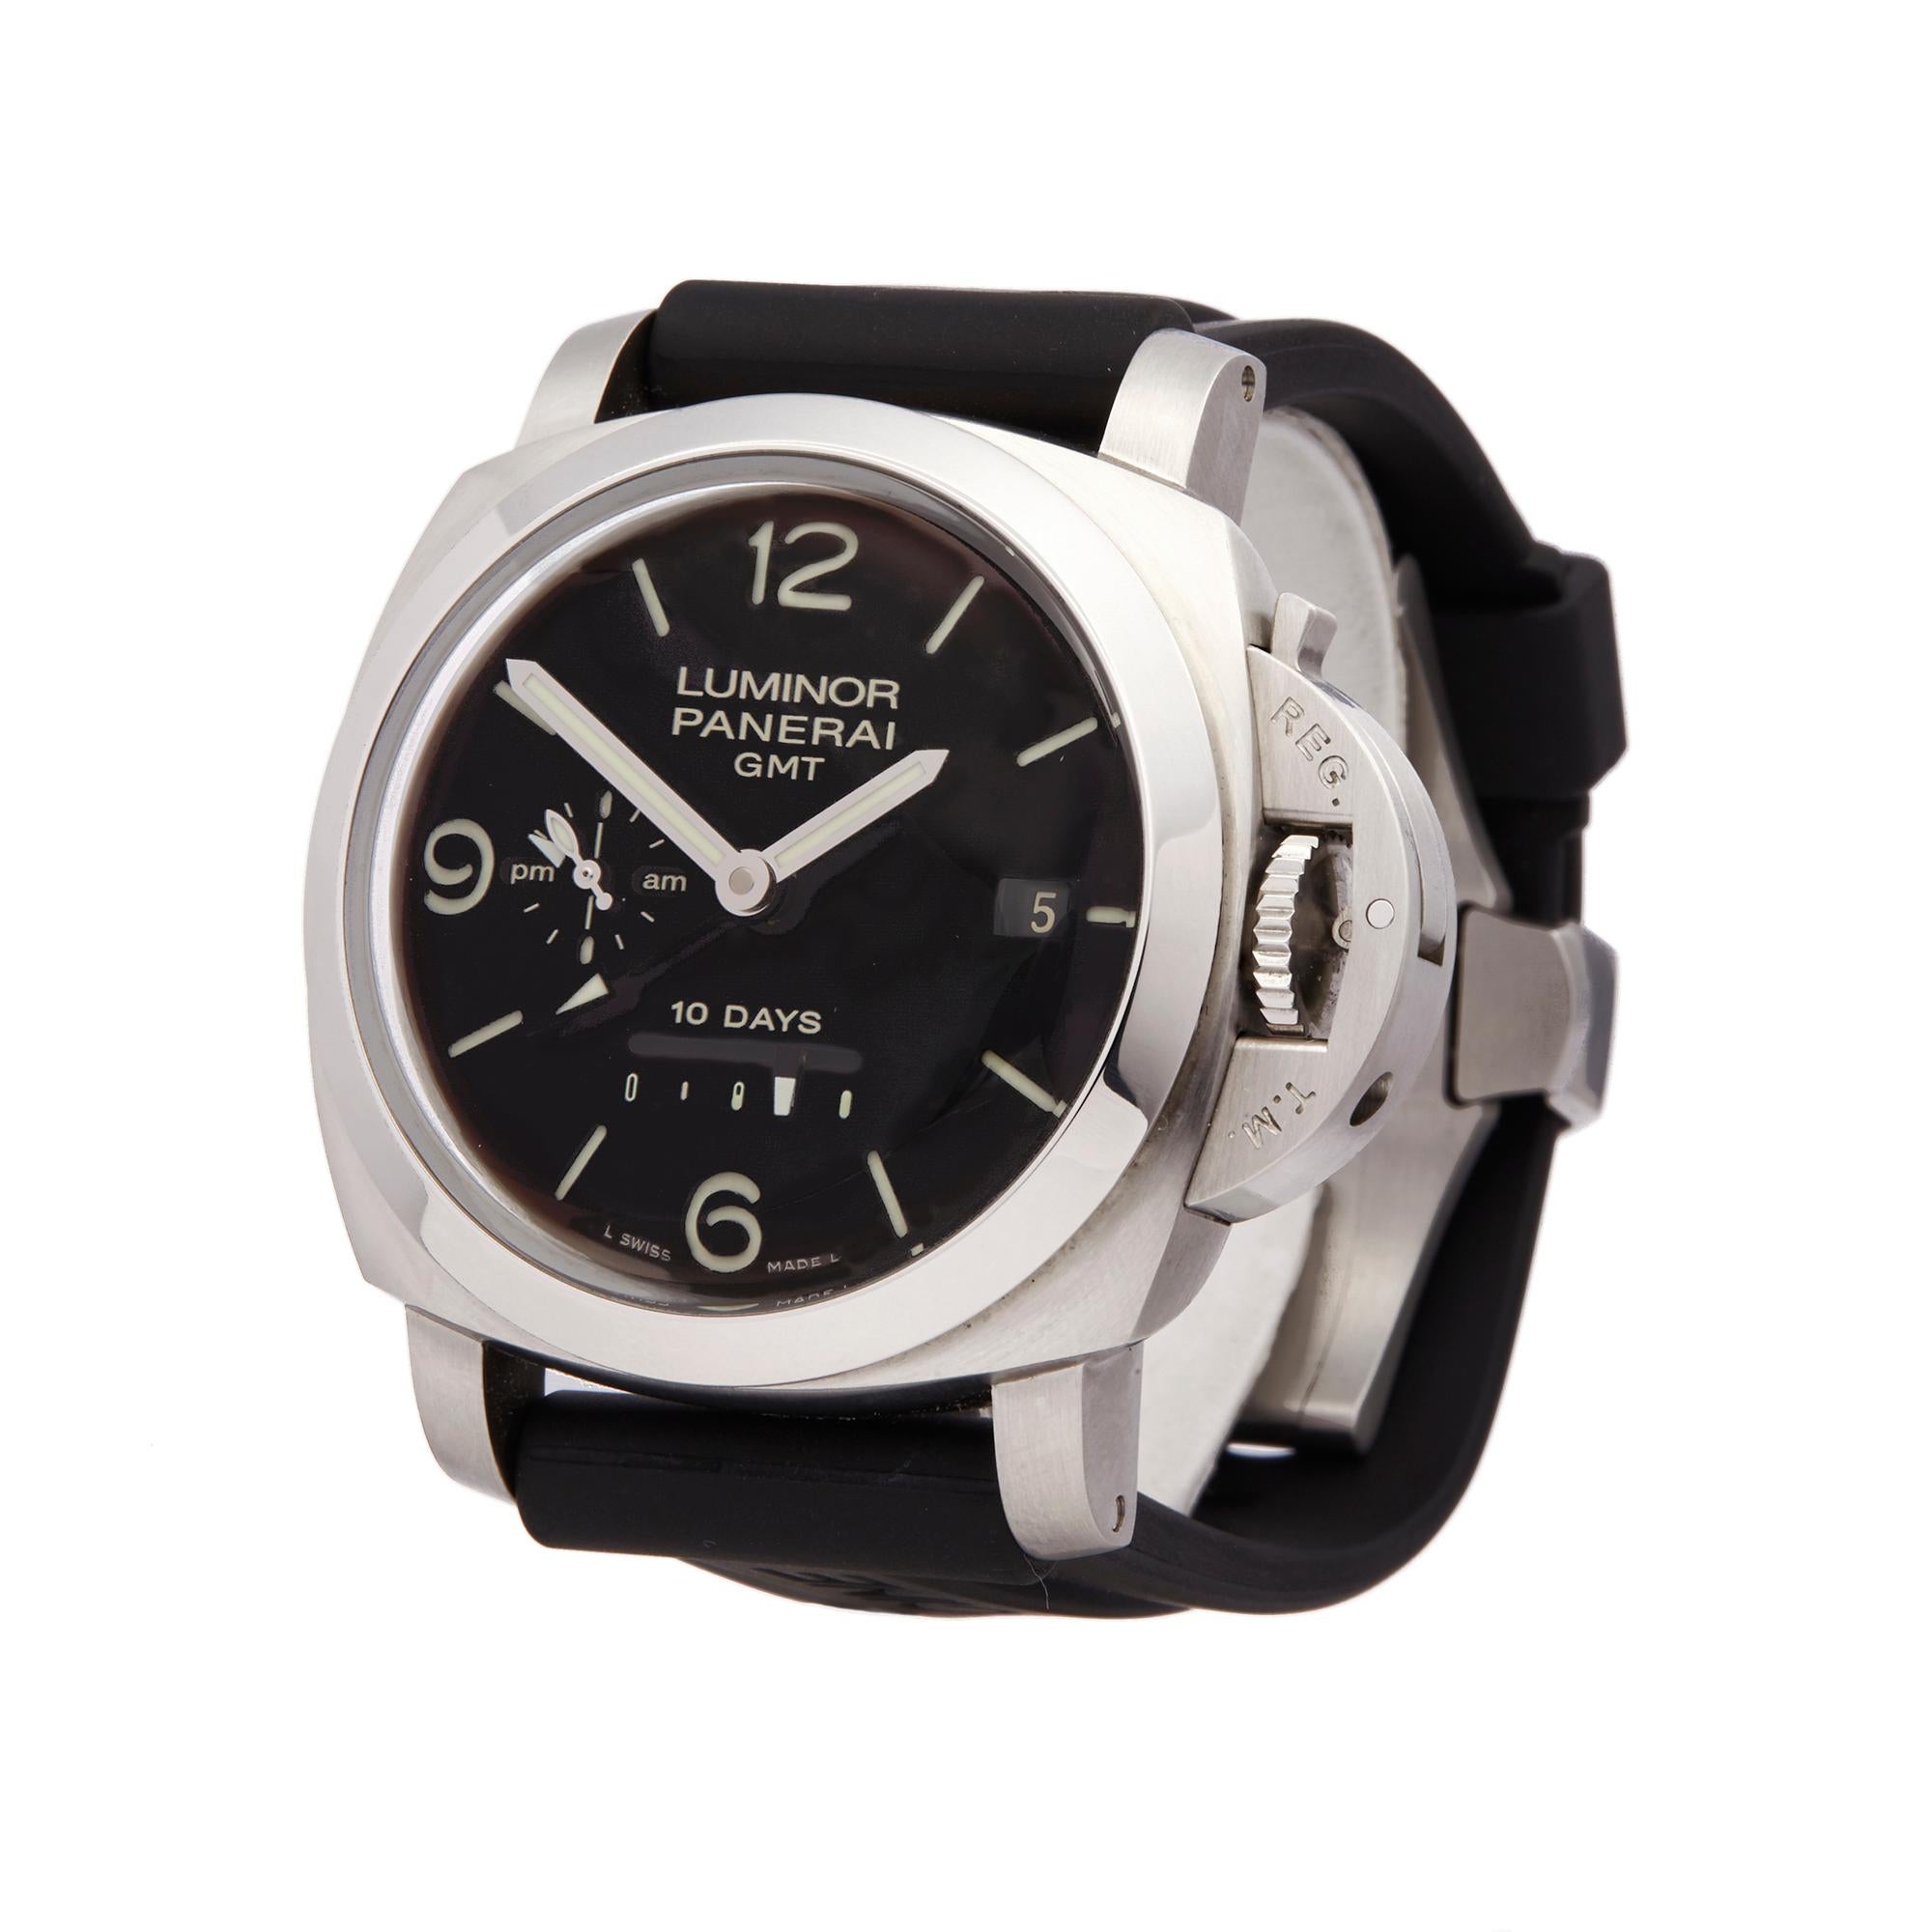 Reference: W5763
Manufacturer: Panerai
Model: Luminor GMT
Model Reference: PAM00270
Age: Circa 2000's
Gender: Men's
Box and Papers: Box, Manuals and Guarantee
Dial: Black Arabic
Glass: Sapphire Crystal
Movement: Automatic
Water Resistance: To